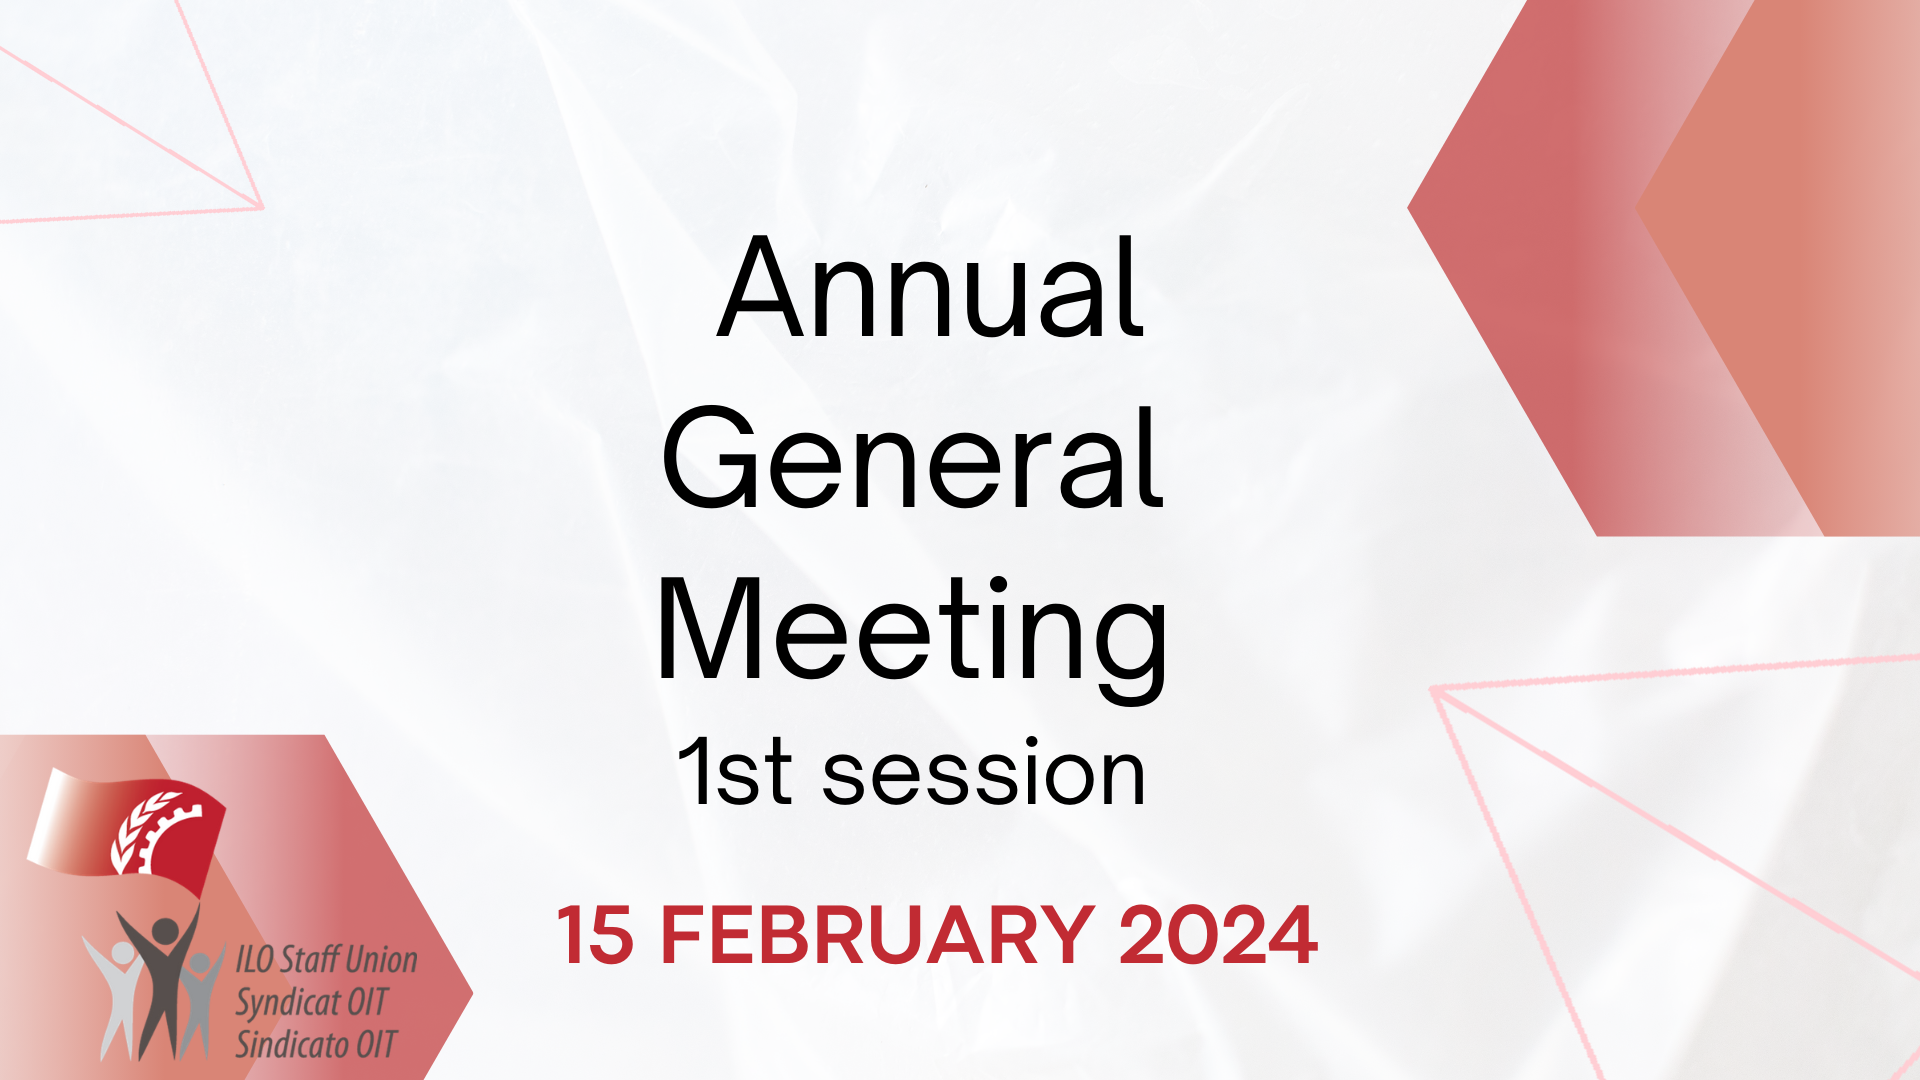 Annual General Meeting - 1st session - 15 February 2024